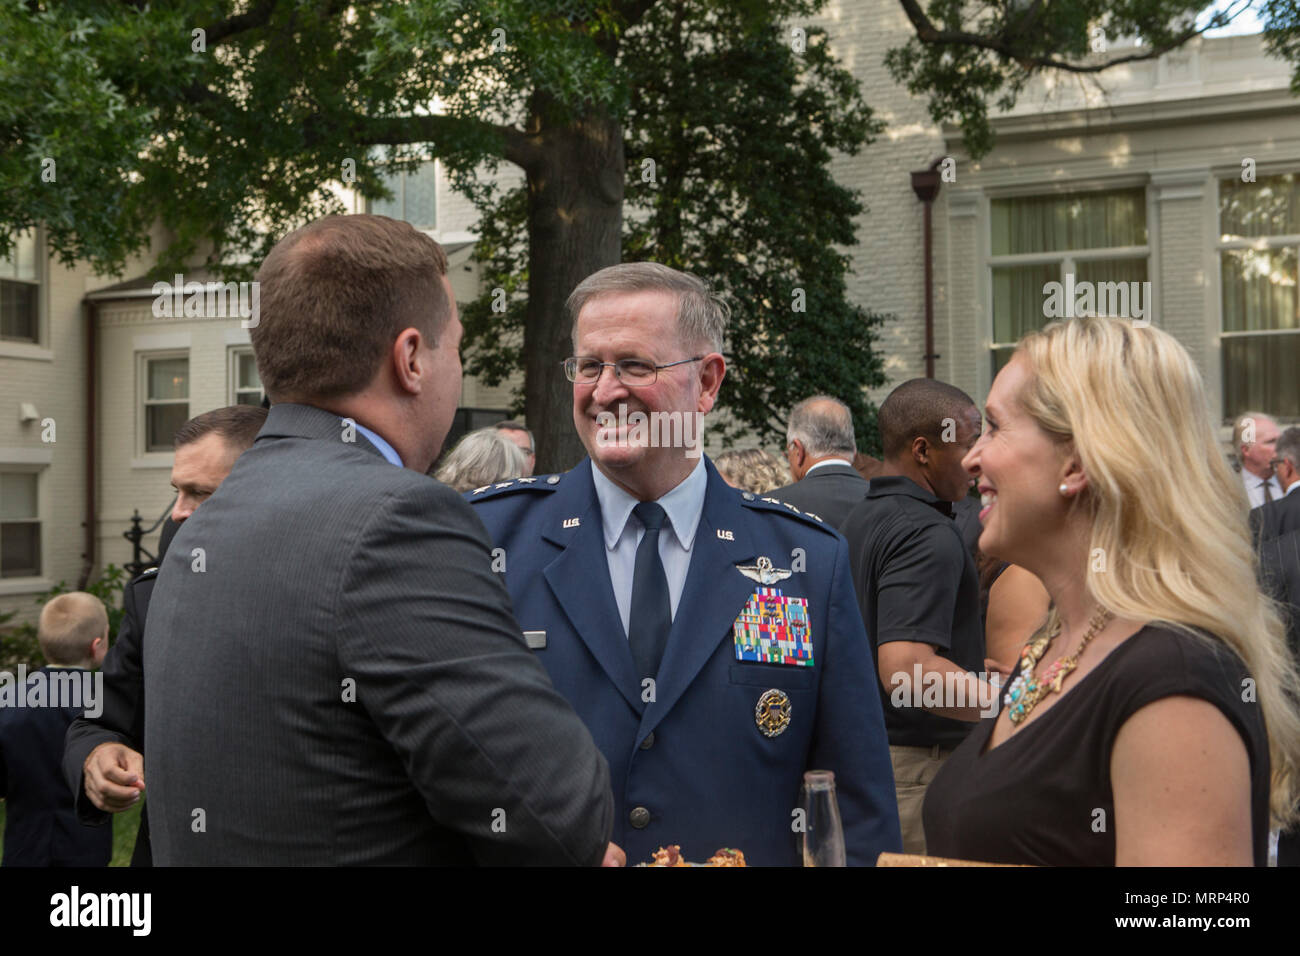 U.S. Air Force Lt. Gen. Thomas J. Trask, vice commander of Headquarters U.S. Special Operations Command (SOCOM), speaks with guests during a reception before an evening parade at Marine Barracks Washington, Washington, D.C., June 23, 2017. Evening parades are held as a means of honoring senior officials, distinguished citizens and supporters of the Marine Corps. (U.S. Marine Corps photo by Lance Cpl. Stephon L. McRae) Stock Photo